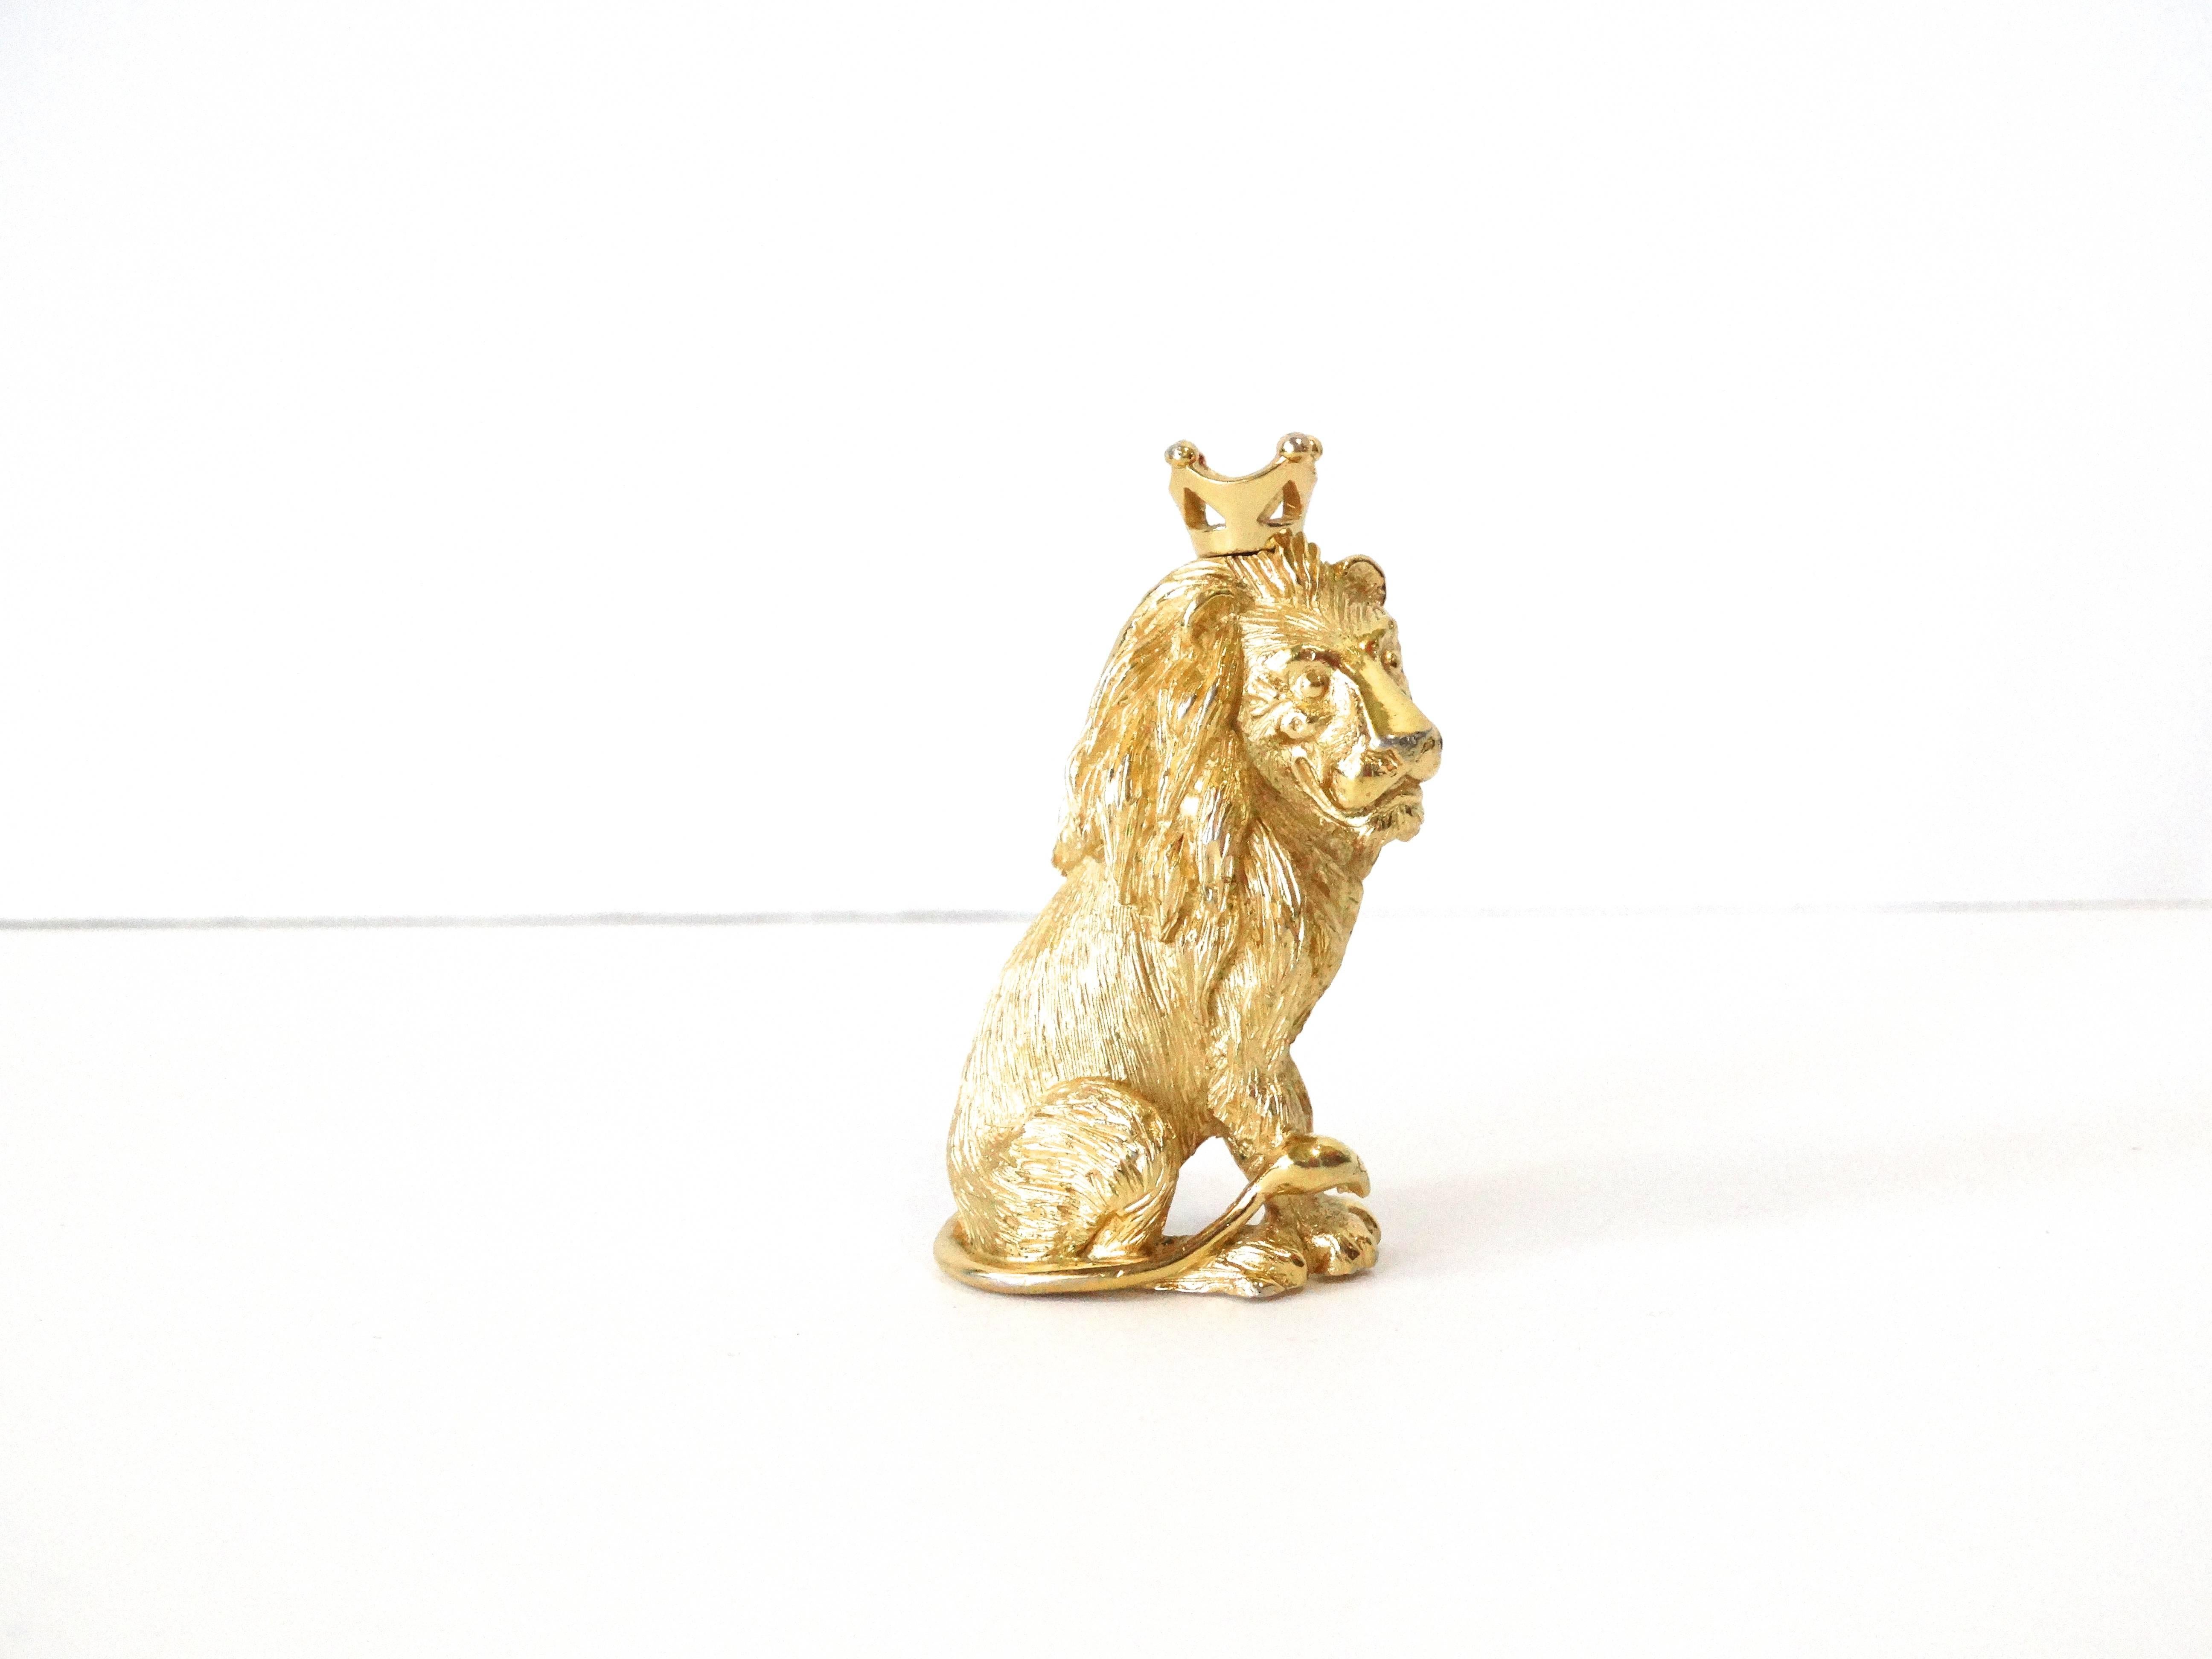 Vintage Crown Trifari Sitting Crowned King of the Jungle Lion Pin Brooch Figural

Size: 2 1/4